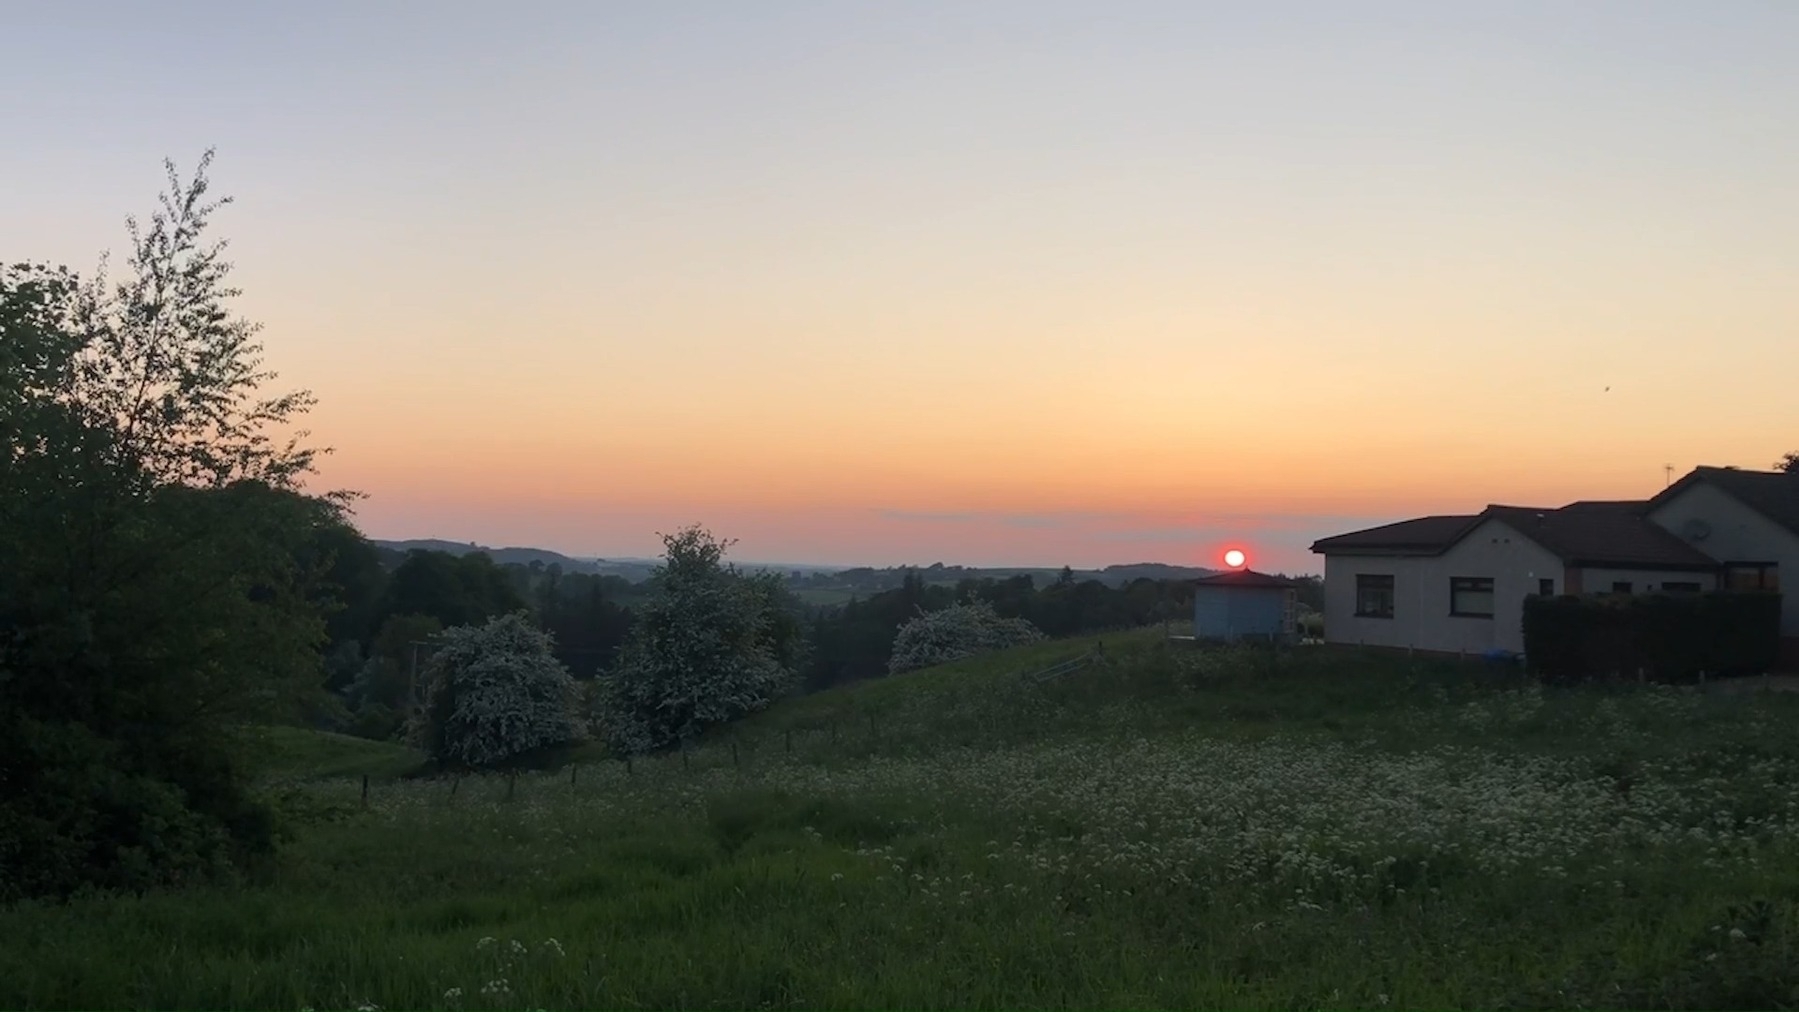 a sunset scene over a green landscape with valley views towards a red, soon to set, sun